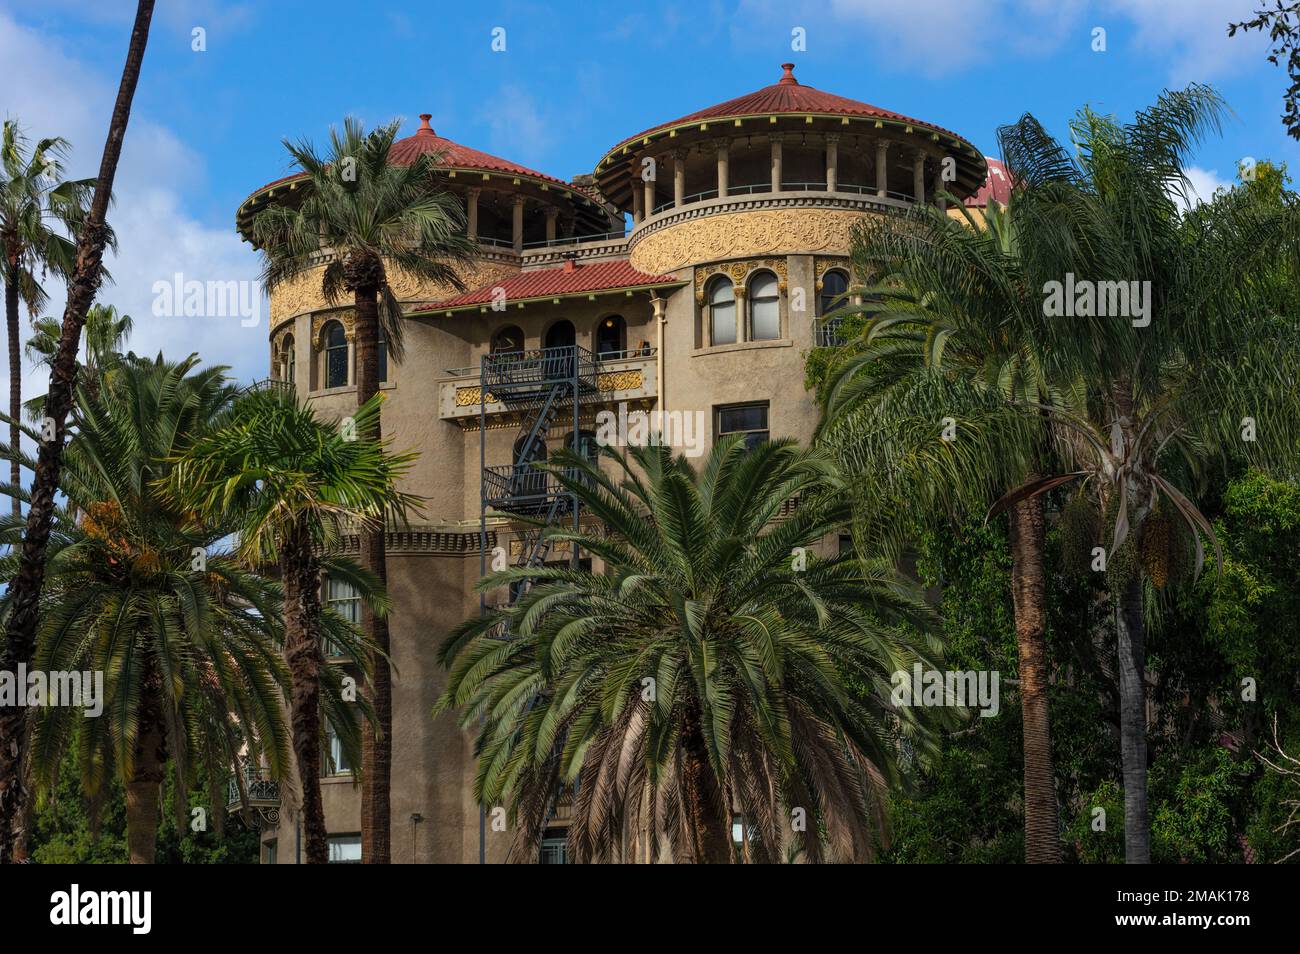 Image of Castle Green in Pasadena, Los Angeles County. The building is a Nationally Registered Historic Monument and a local landmark. Stock Photo